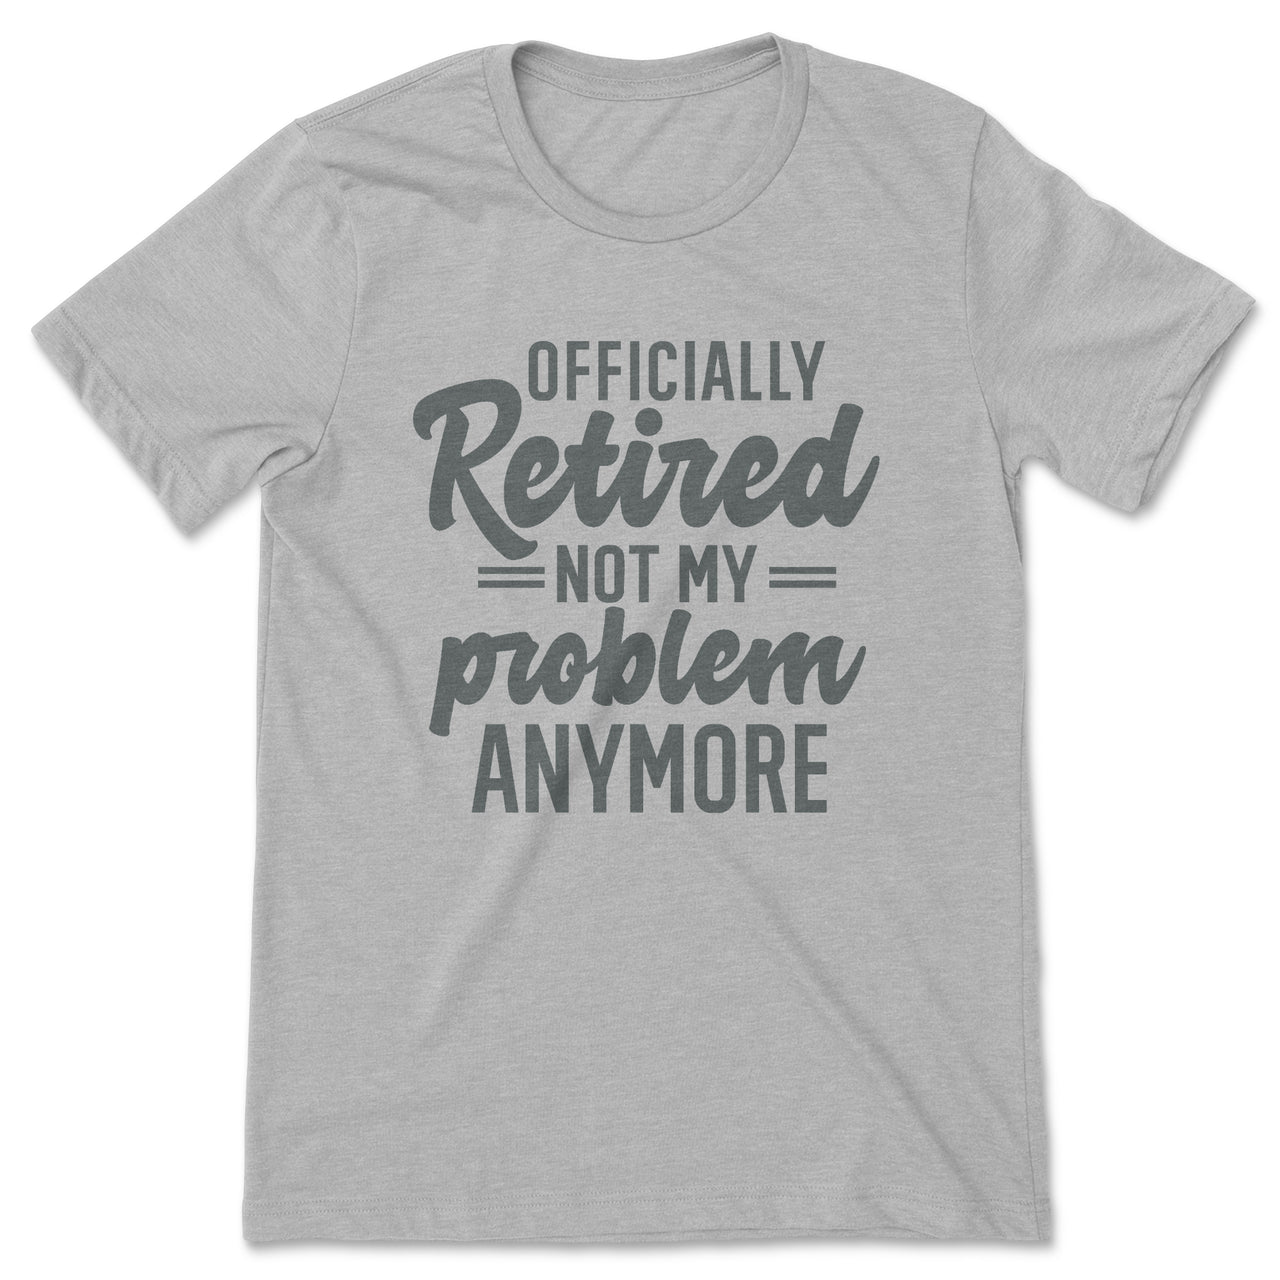 Retirement Tee Shirt - Officially Retired Not My Problem Anymore T-Shirt